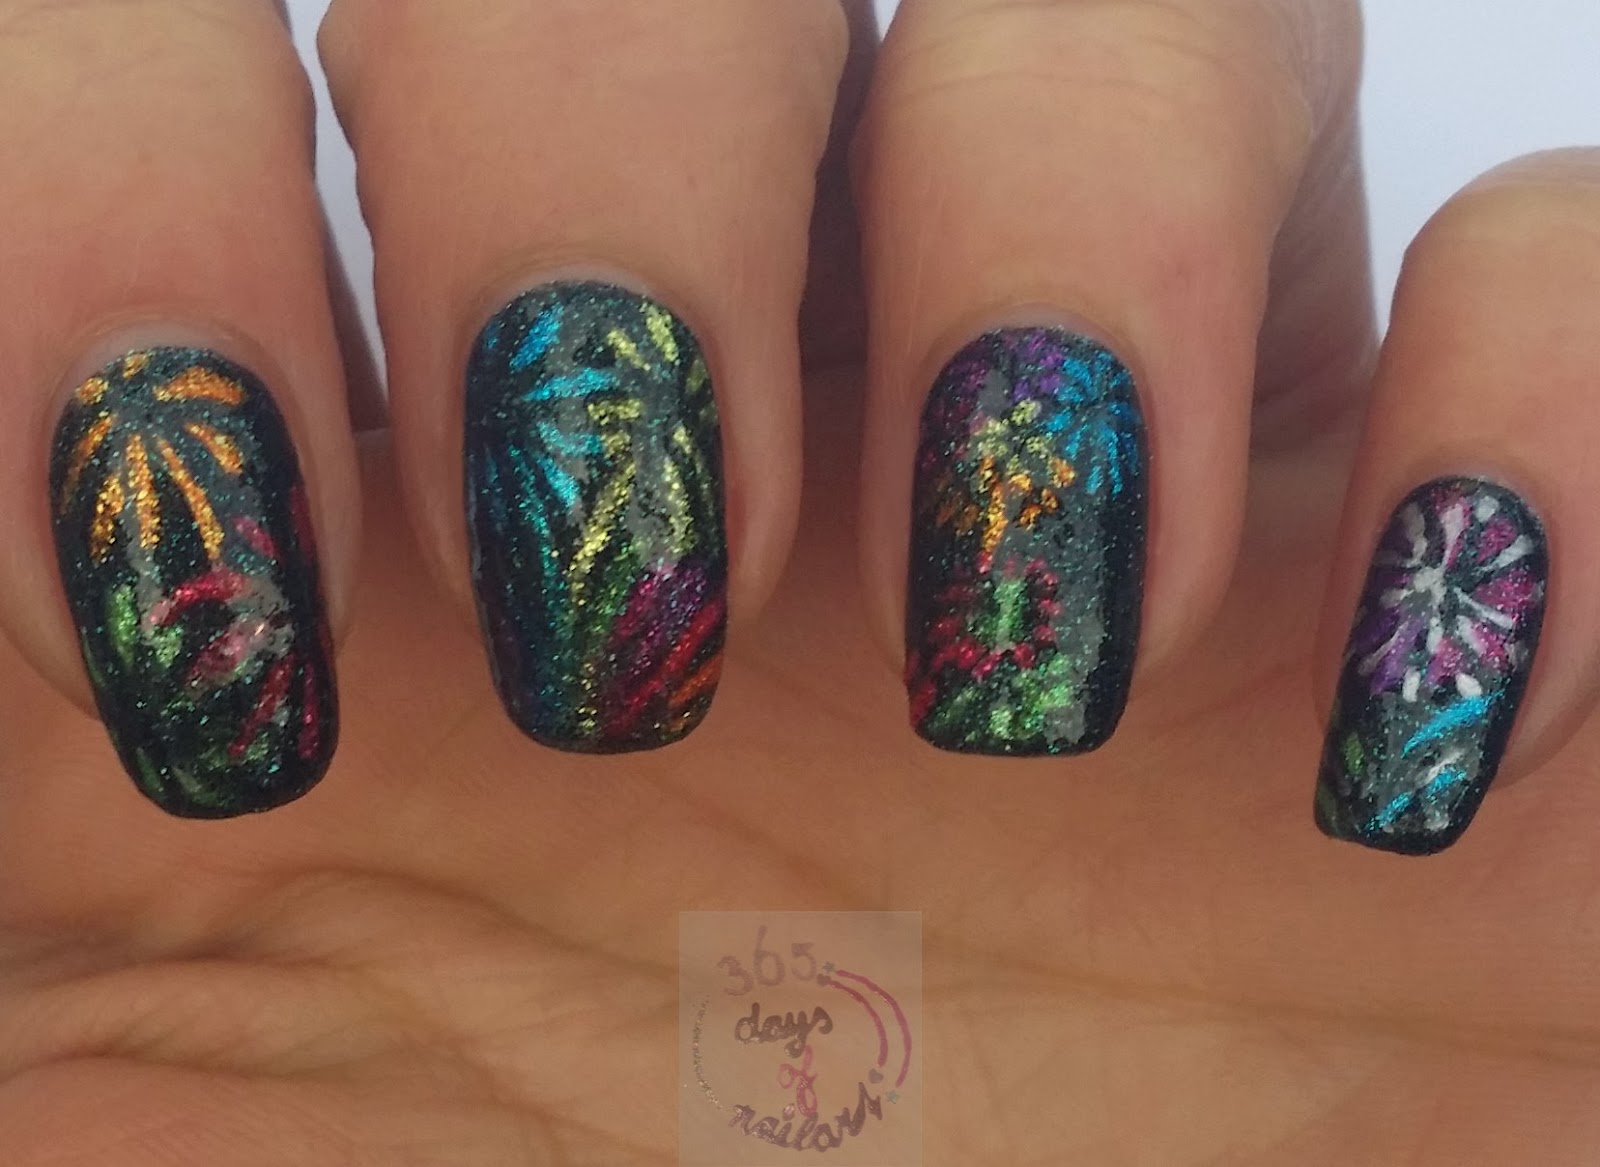 5. Creative Nail Designs for July 4th Fireworks - wide 1